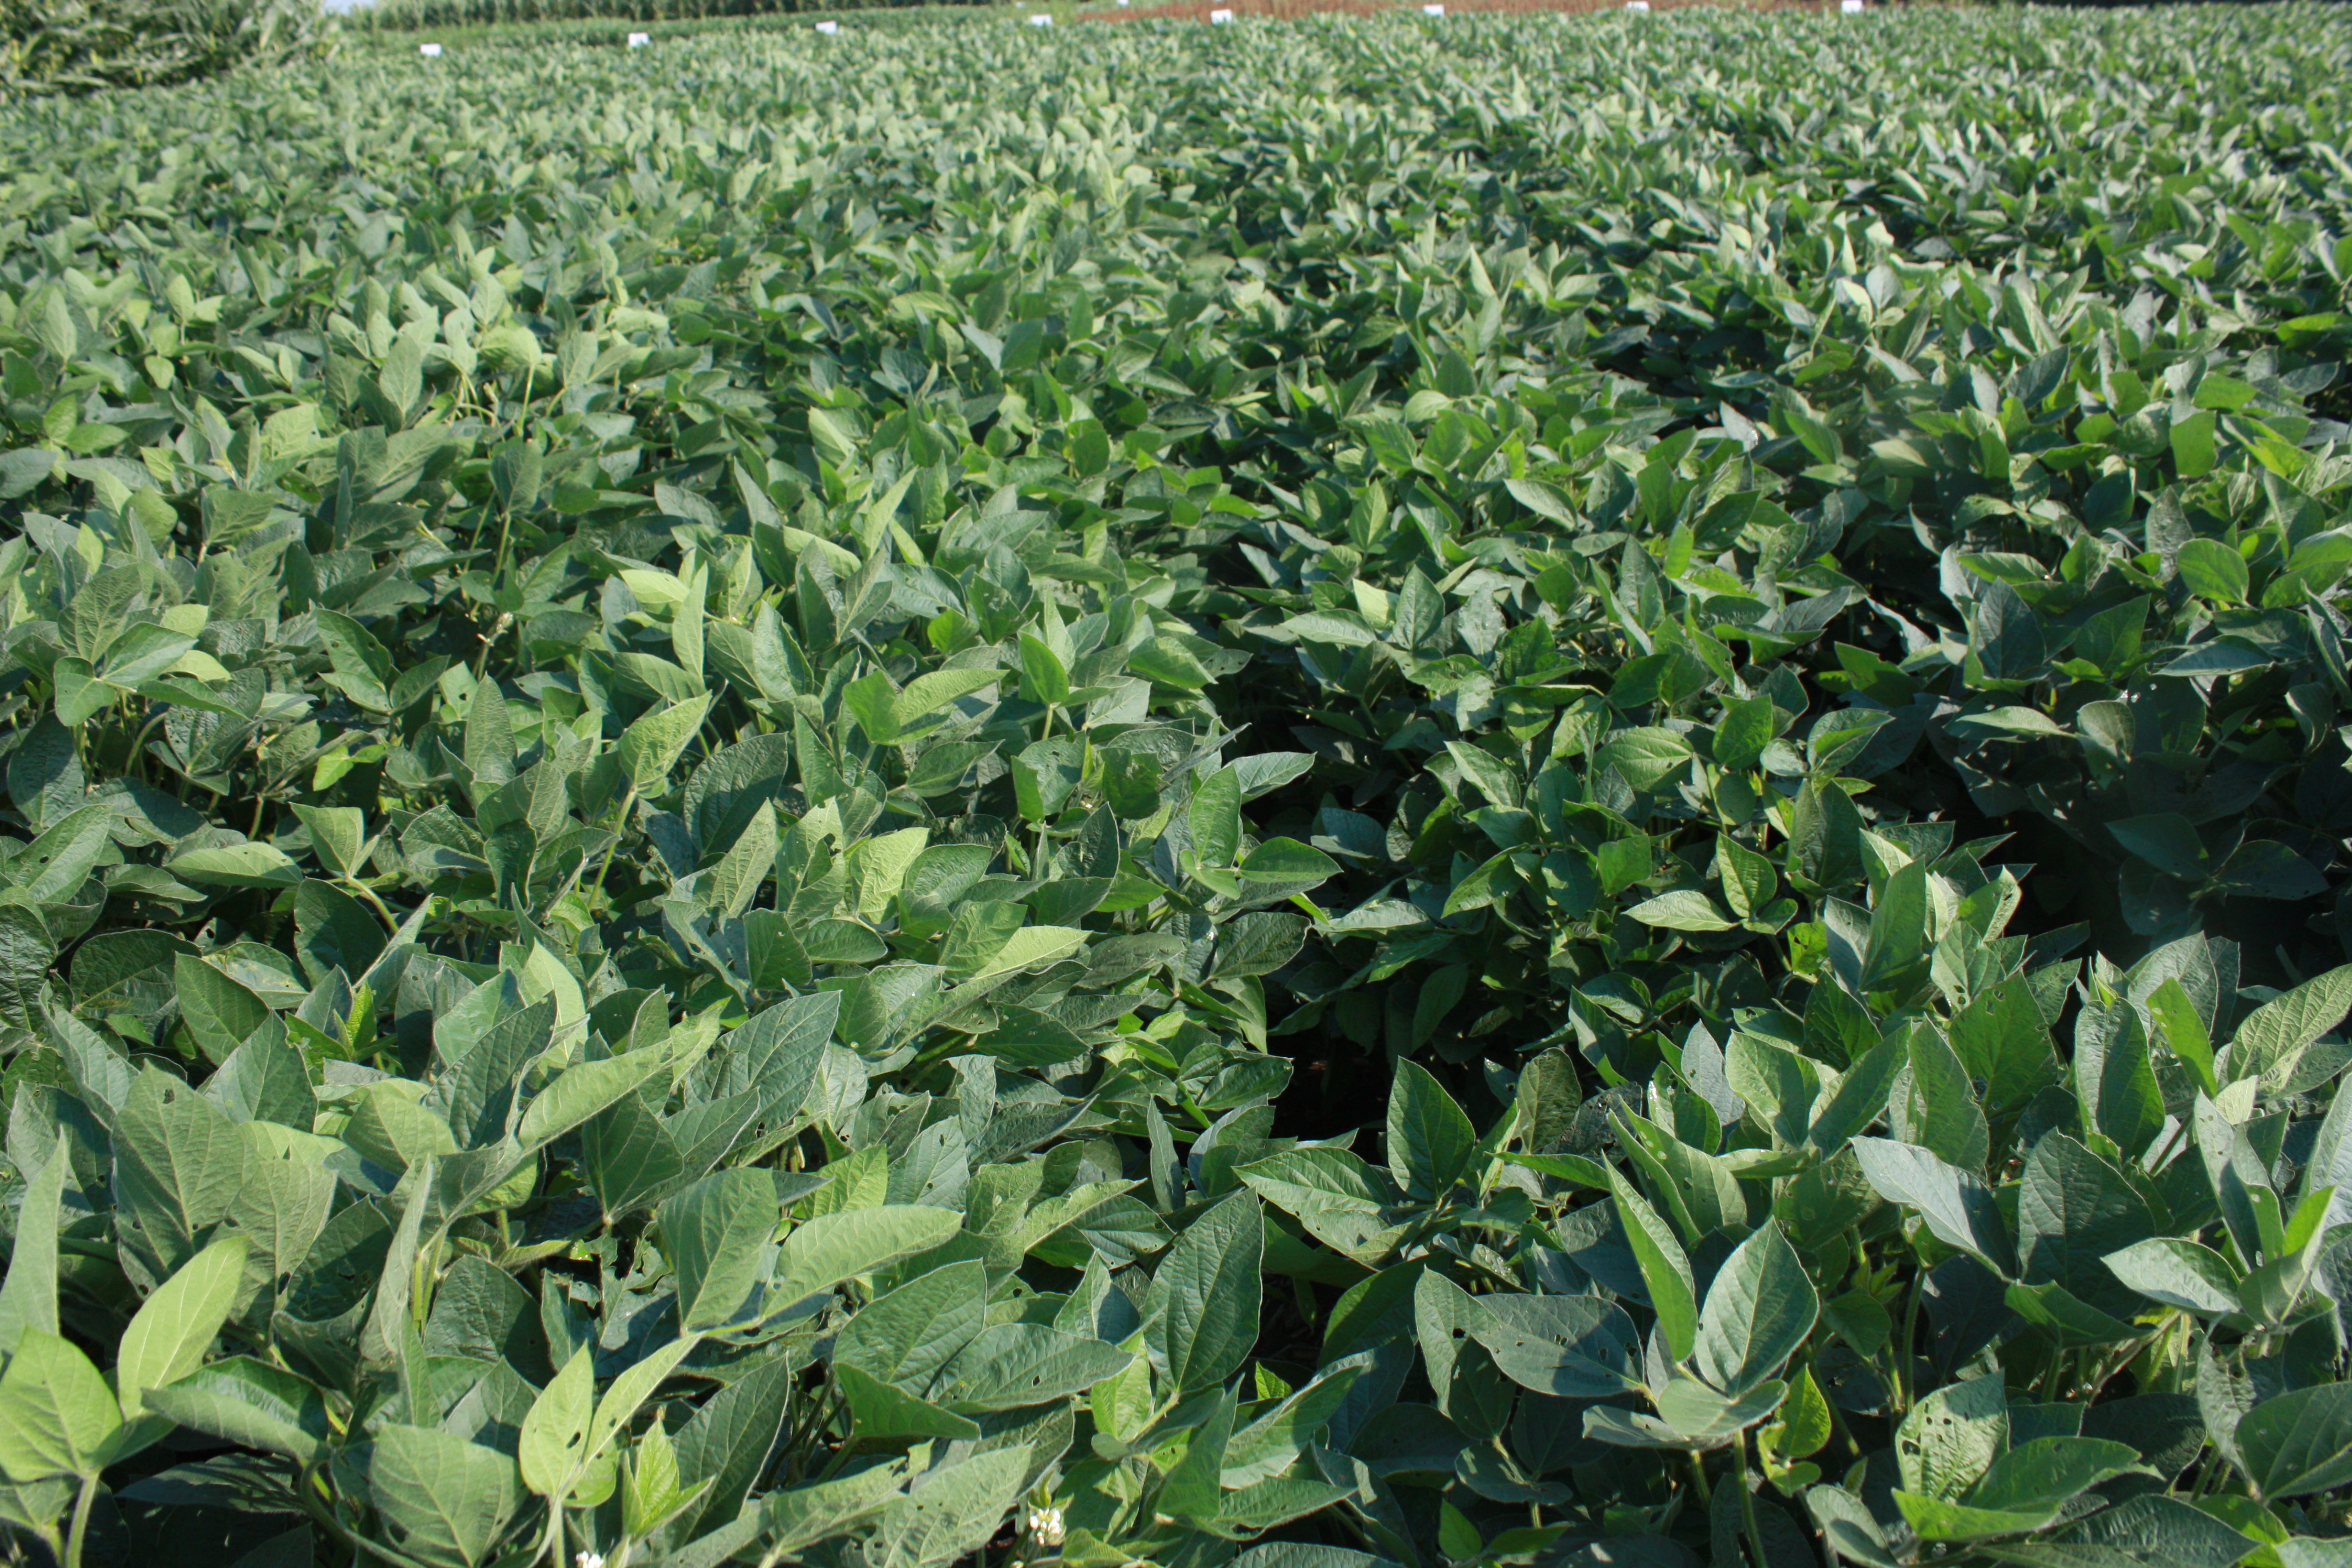 This agronomic image shows soybean plants.